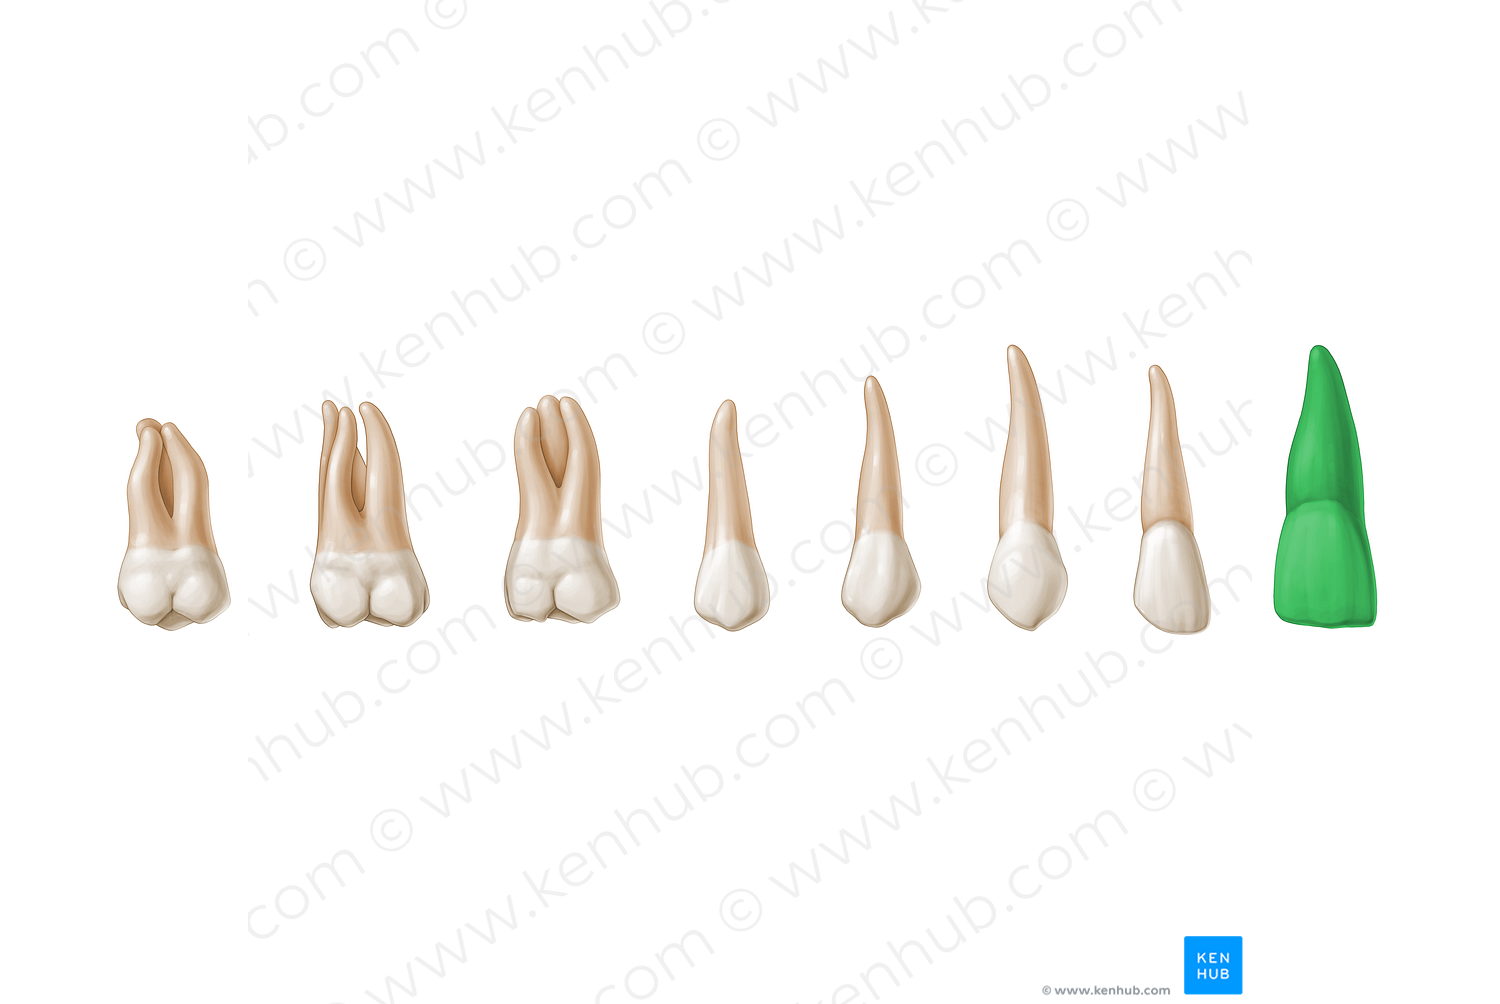 Central incisor tooth (#3204)